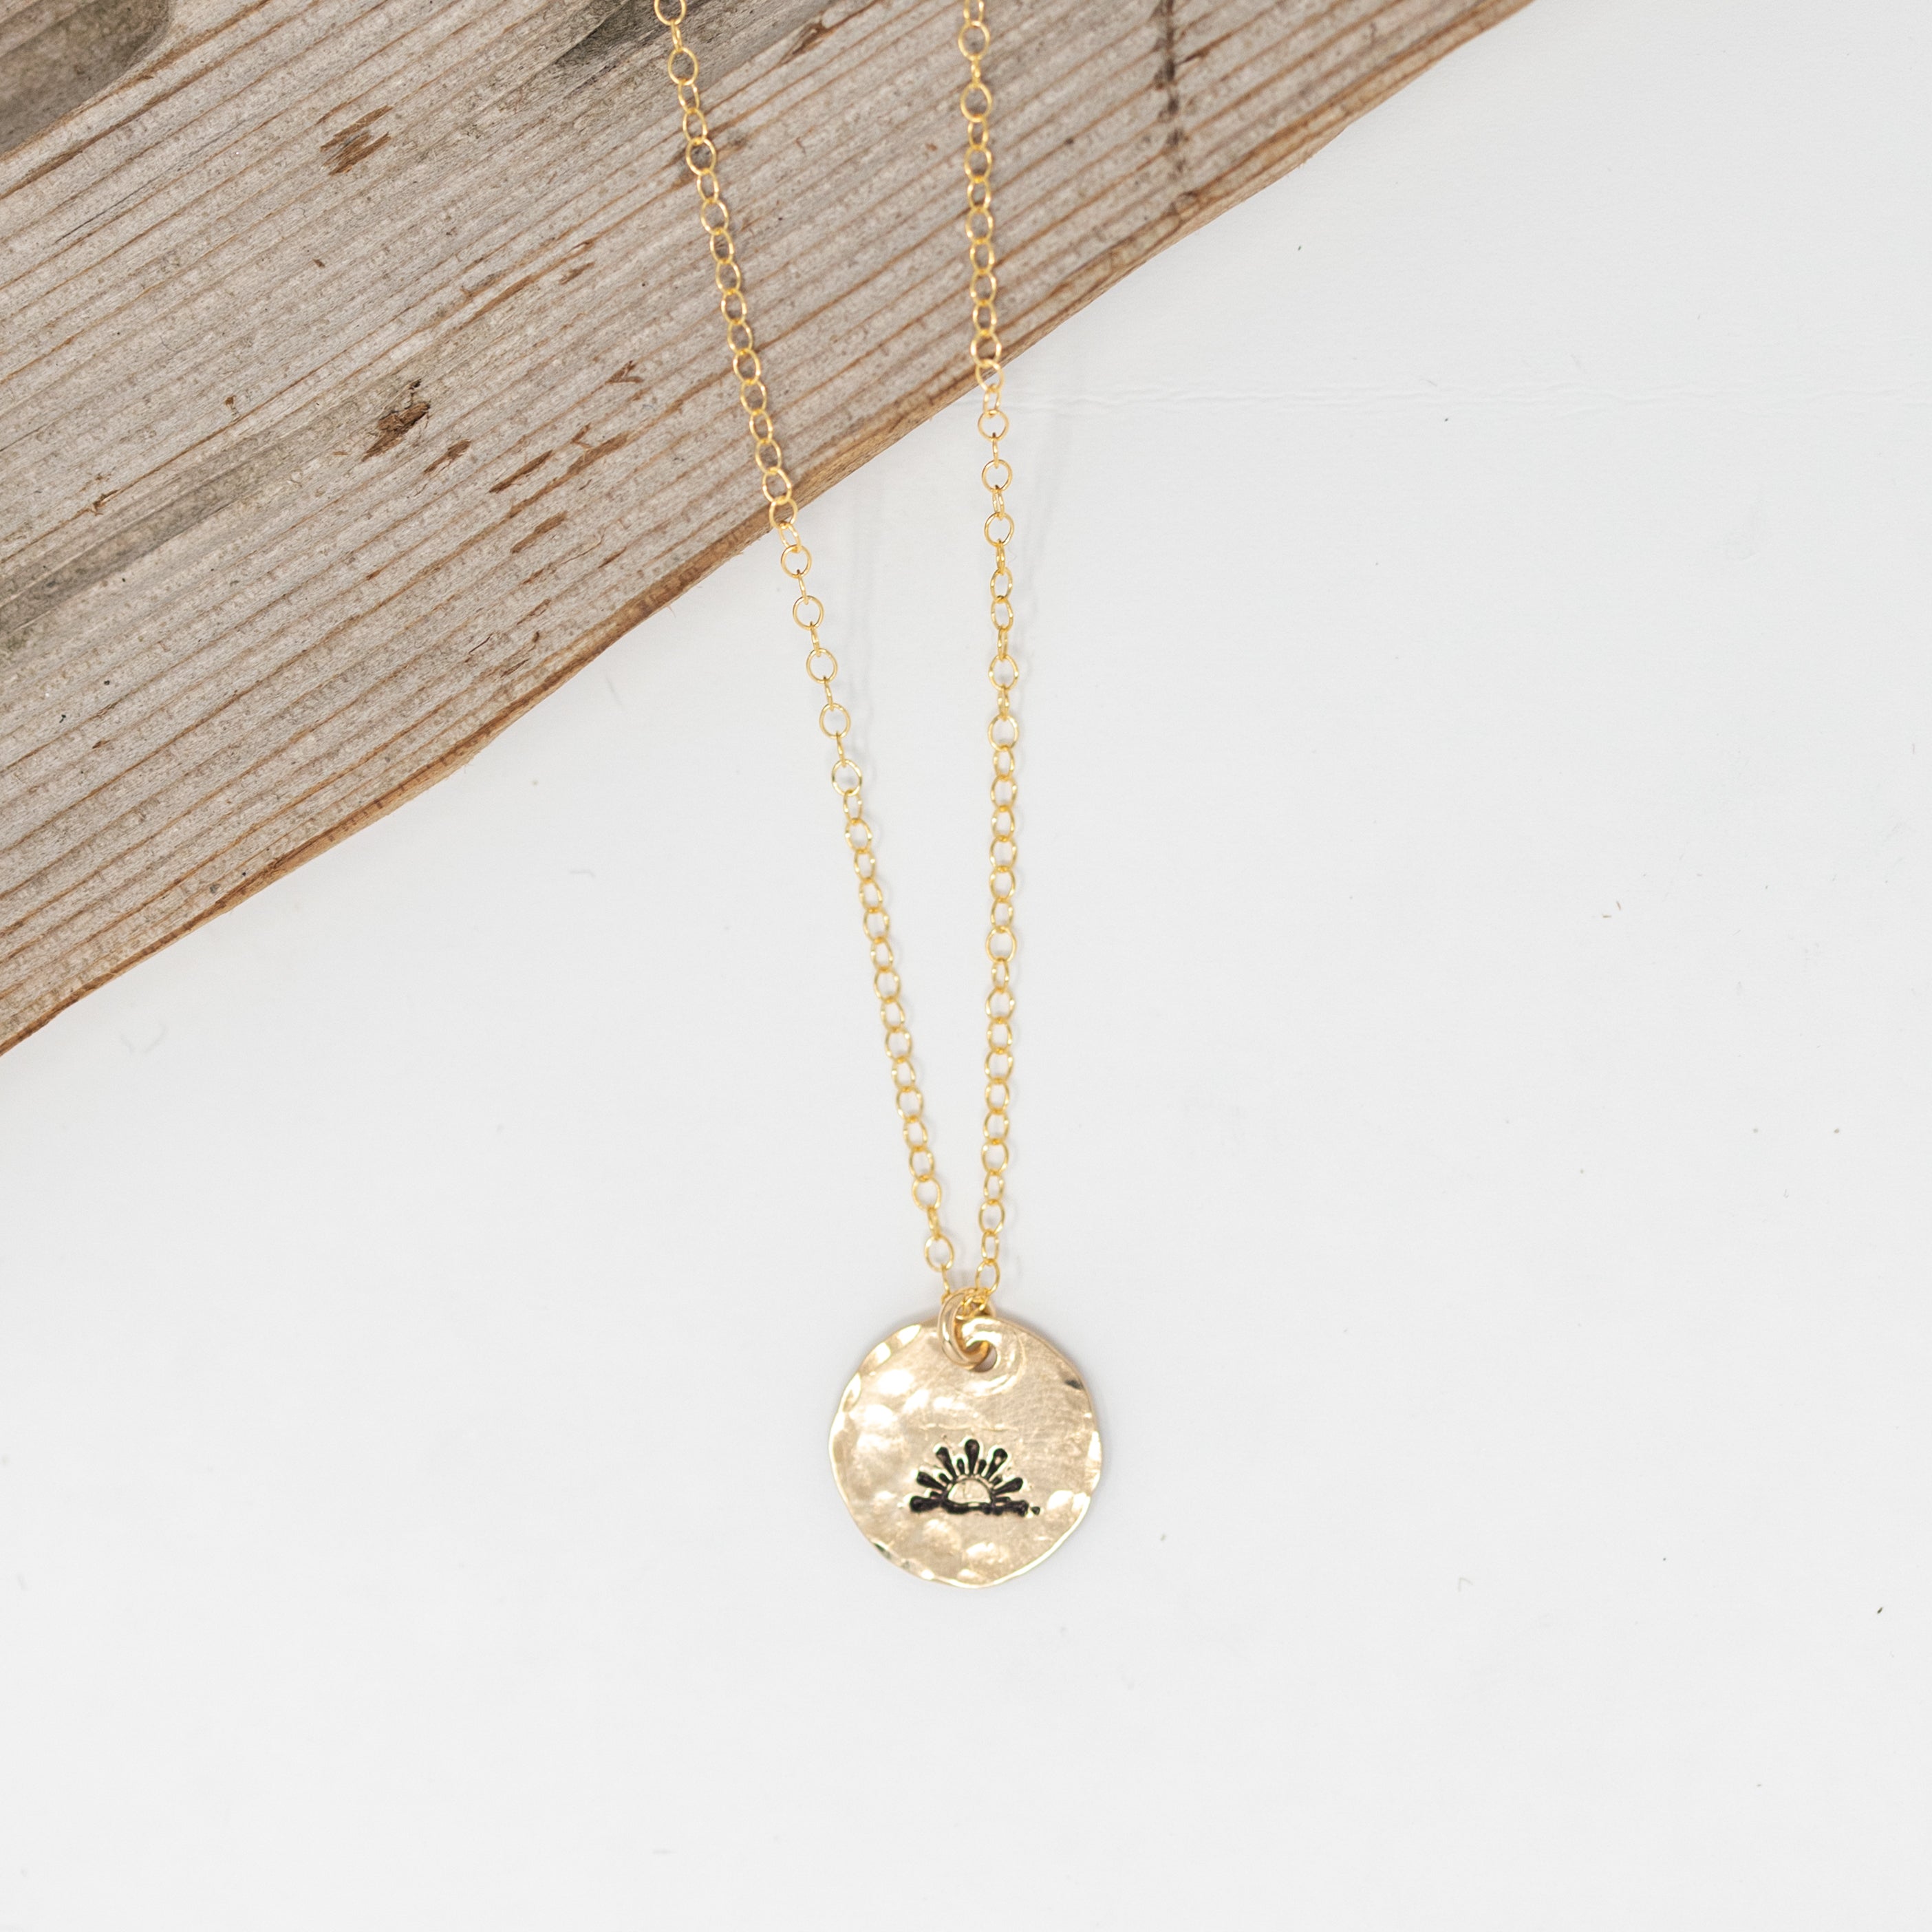 gold filled medium size circle (less than a dime), with a sunset stamped on it, attached to a gold chain